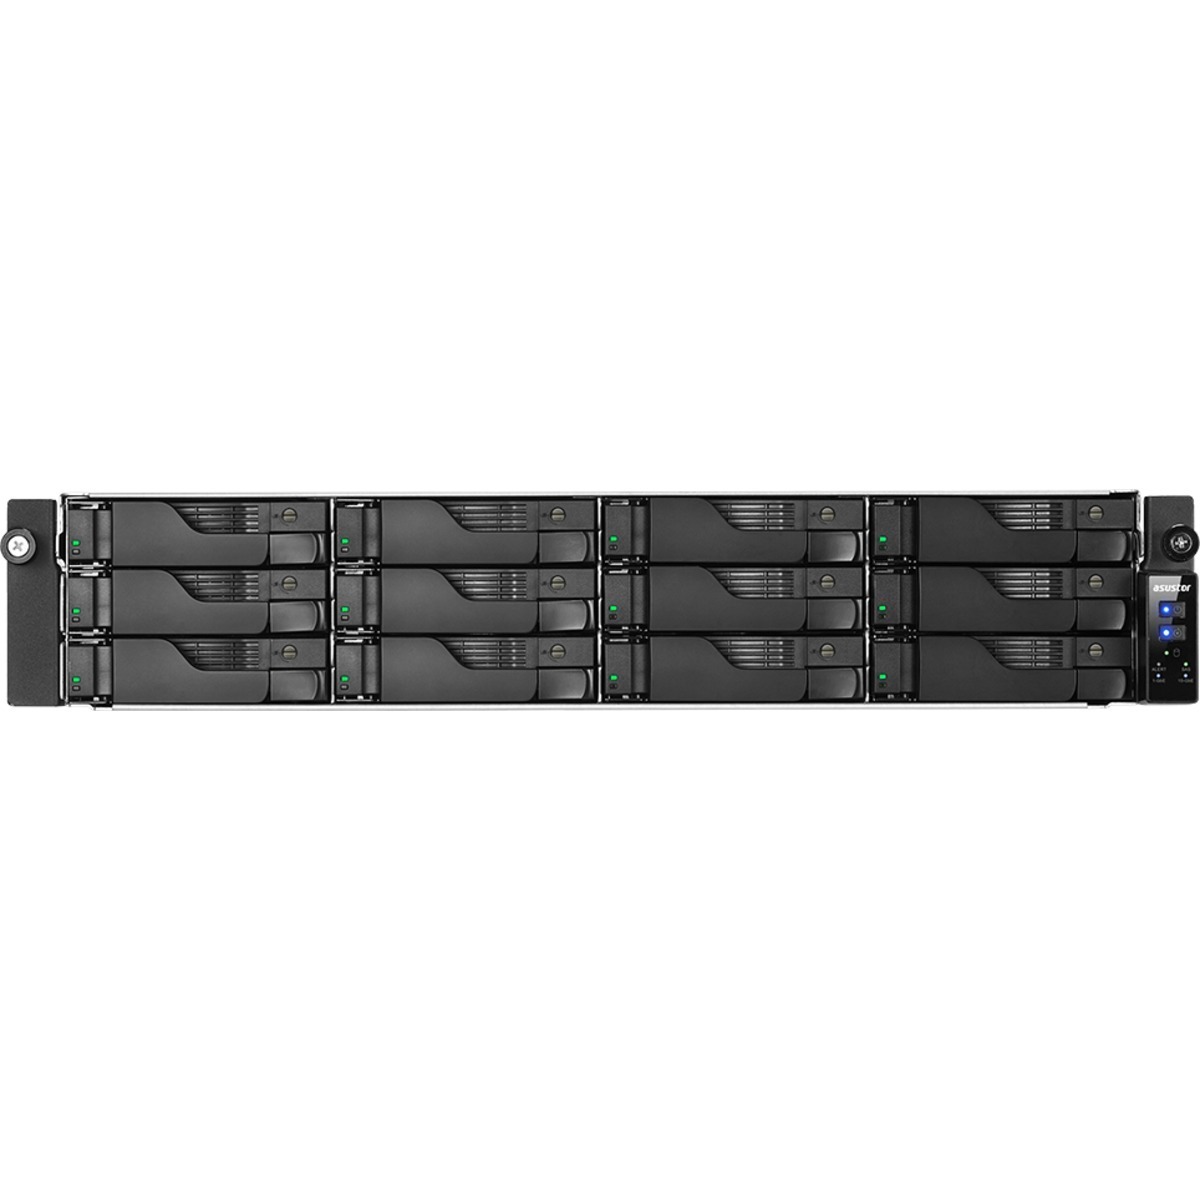 ASUSTOR AS7112RDX Lockerstor 12R Pro 10tb 12-Bay RackMount Large Business / Enterprise NAS - Network Attached Storage Device 10x1tb Sandisk Ultra 3D SDSSDH3-1T00 2.5 560/520MB/s SATA 6Gb/s SSD CONSUMER Class Drives Installed - Burn-In Tested AS7112RDX Lockerstor 12R Pro